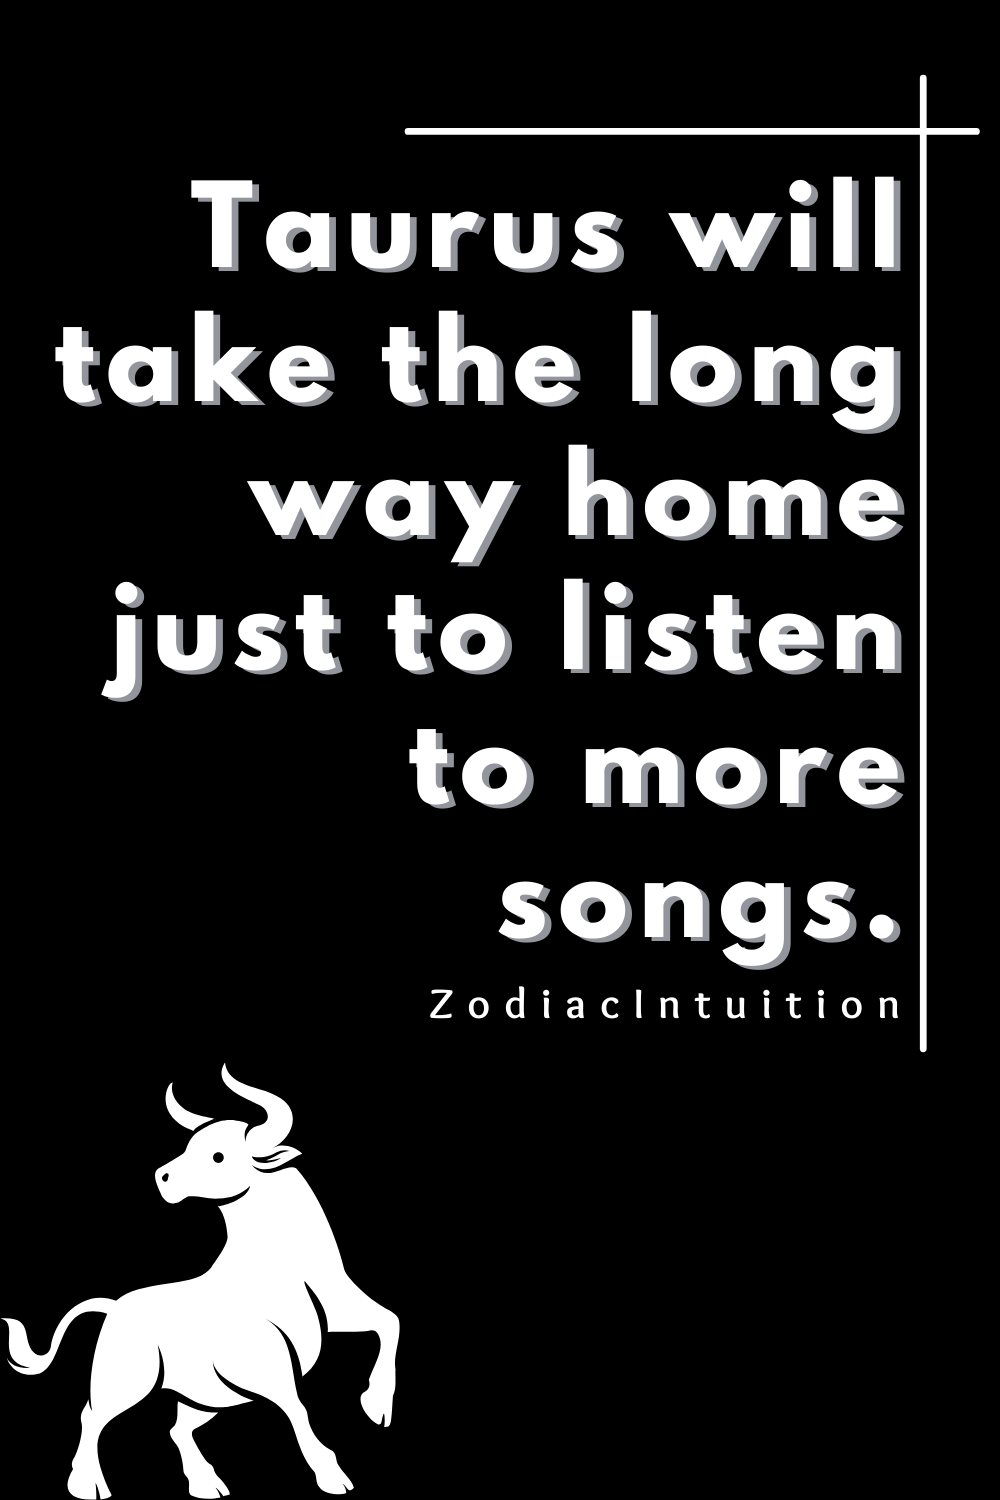 Taurus will take the long way home just to listen to more songs.